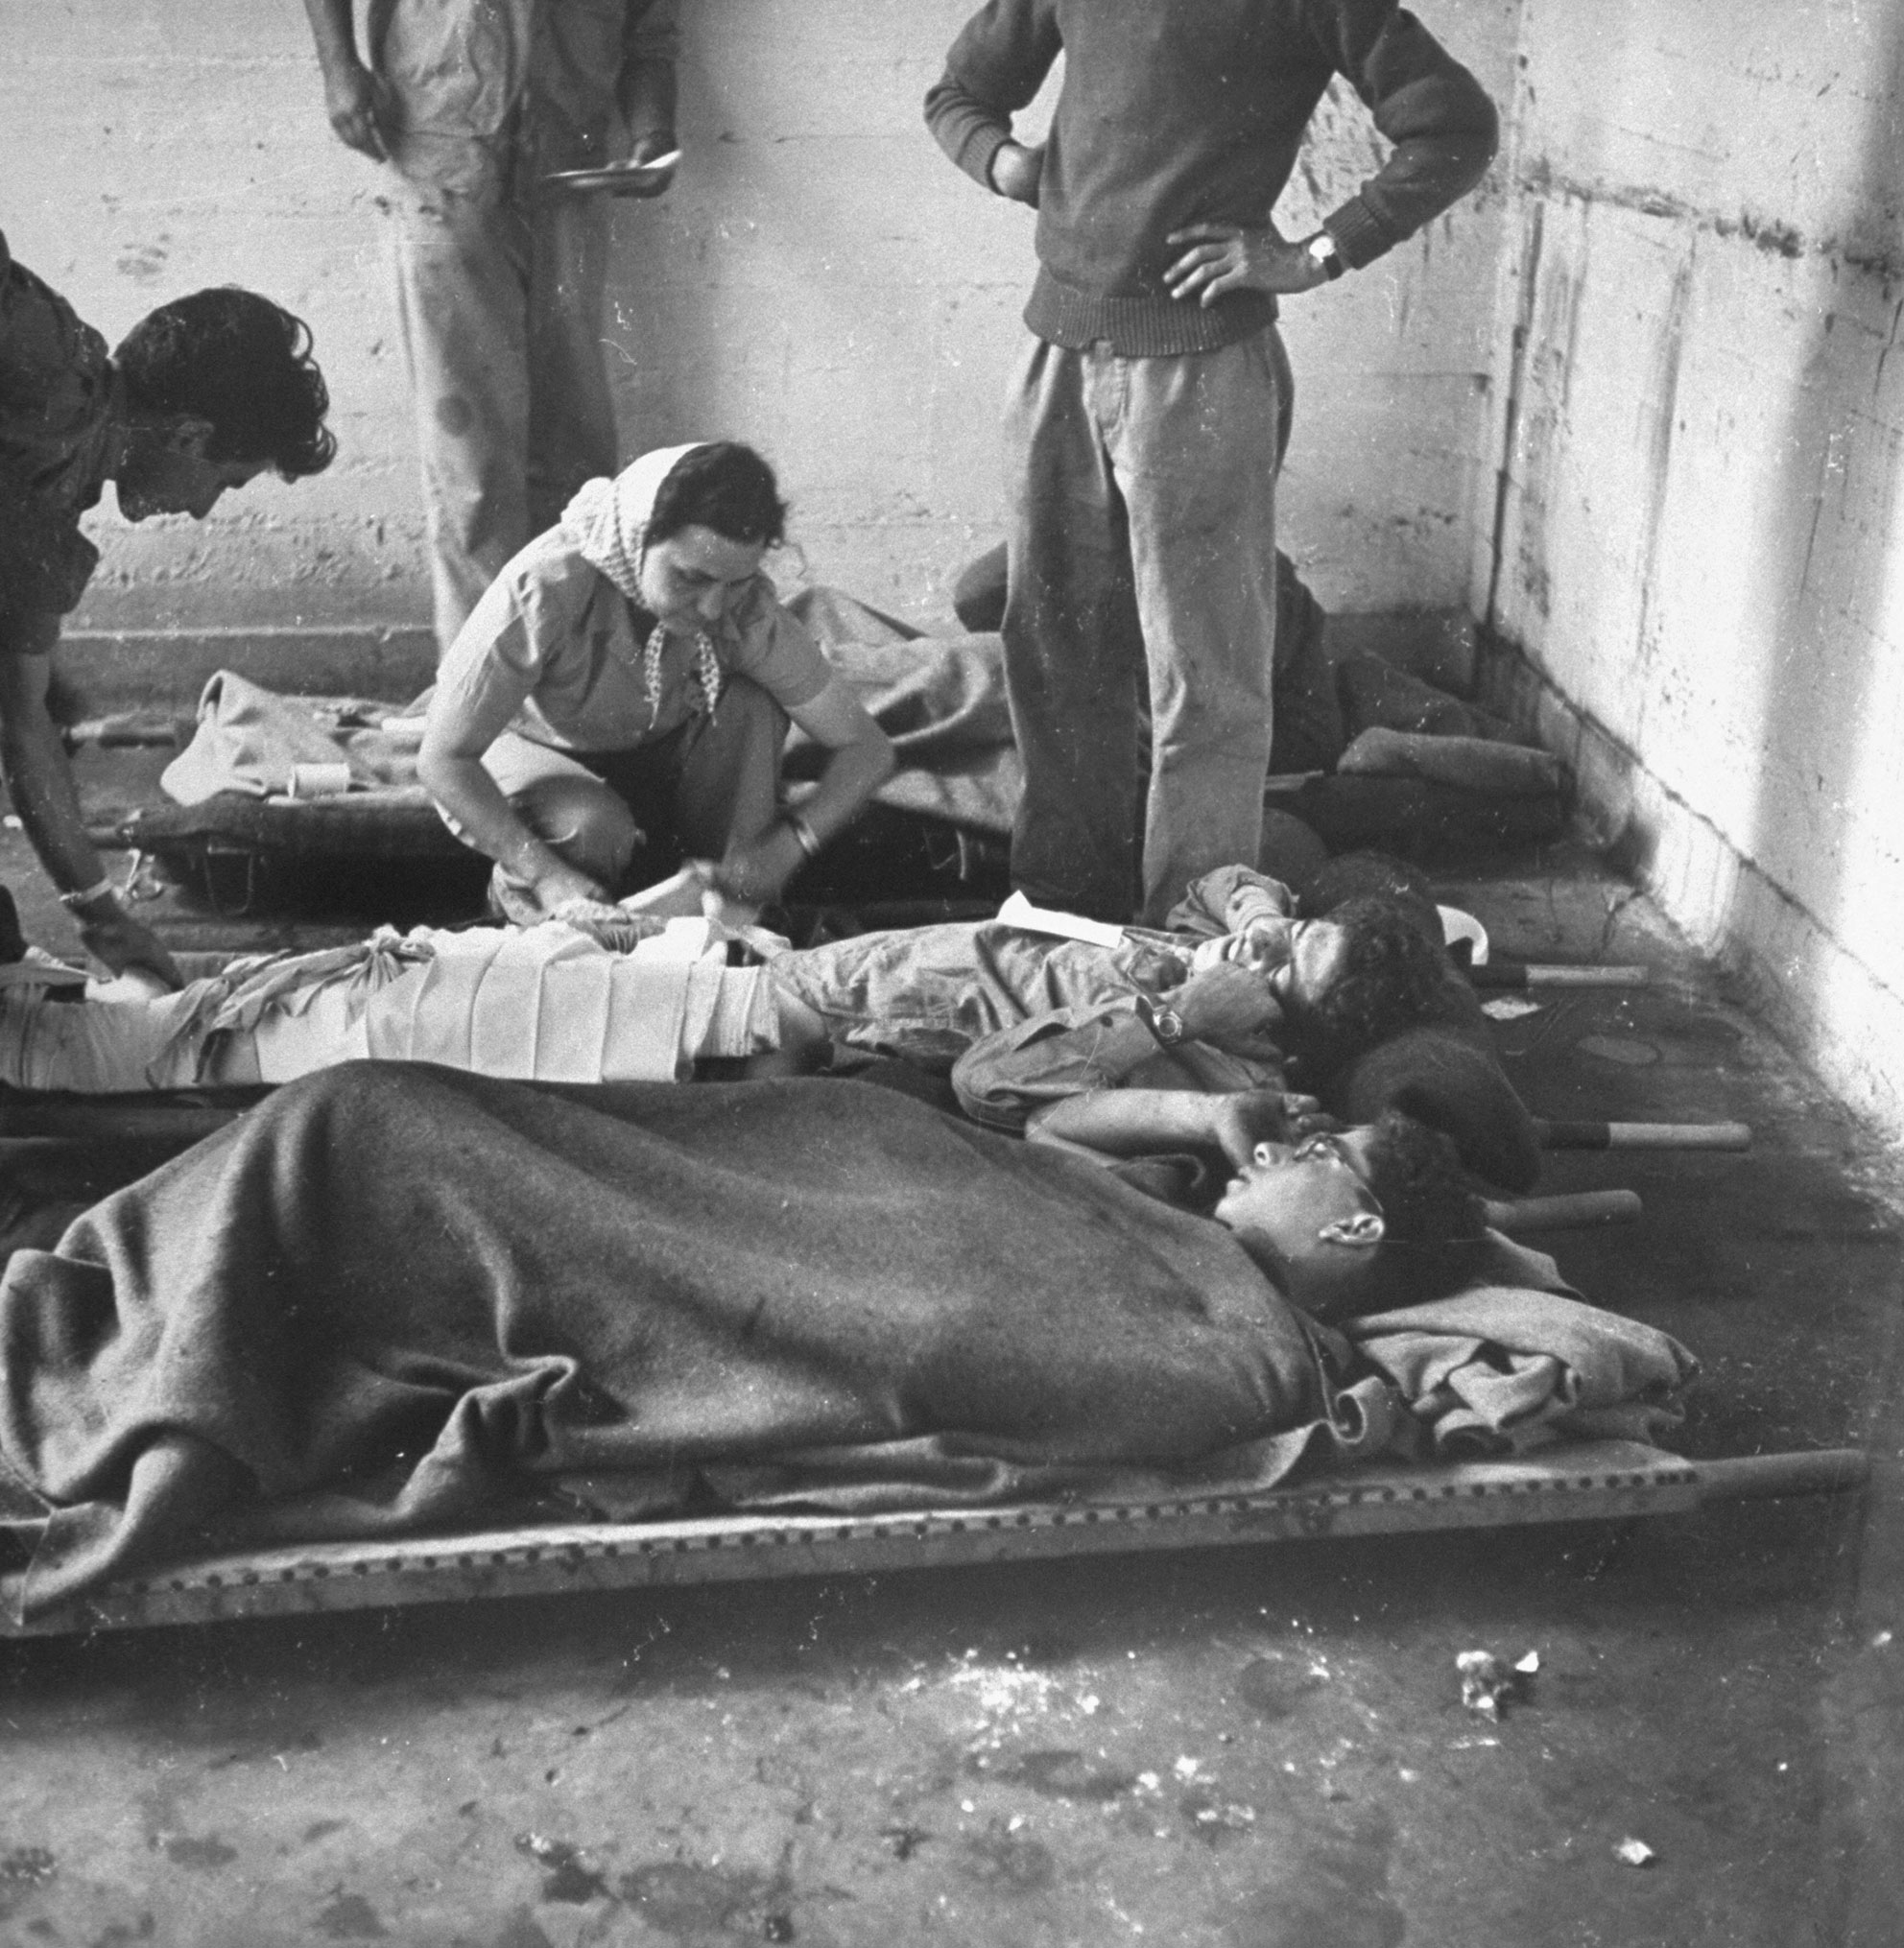 Israeli wounded being cared for in forward first aid station, shortly after the establishment of the state of Israel, exact location unknown, May 1948.